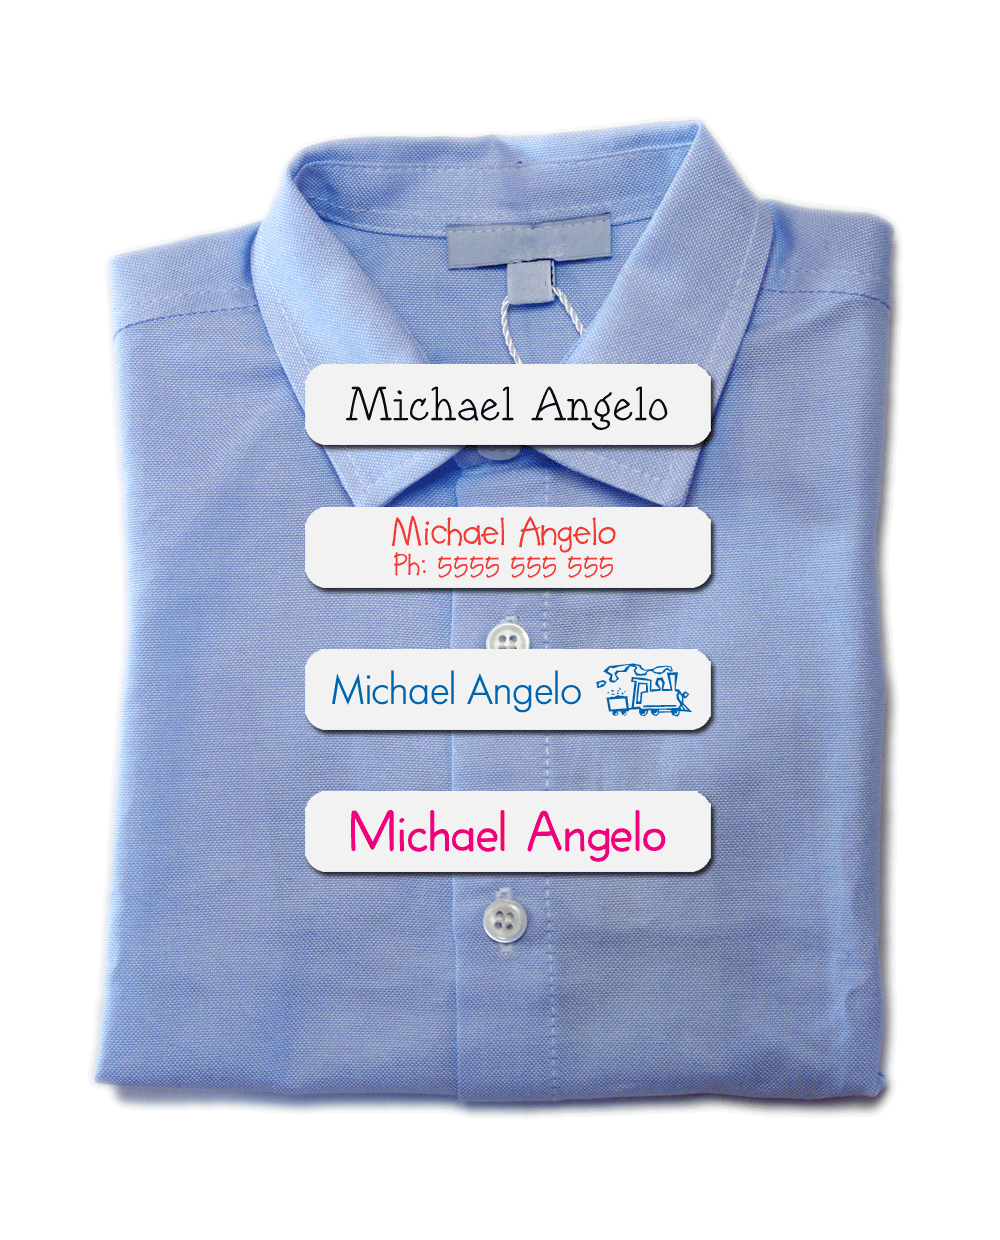 Custom Iron On Name Labels For Clothing  Order Personalized Iron On Name  Tags For Your Clothes - Name Maker